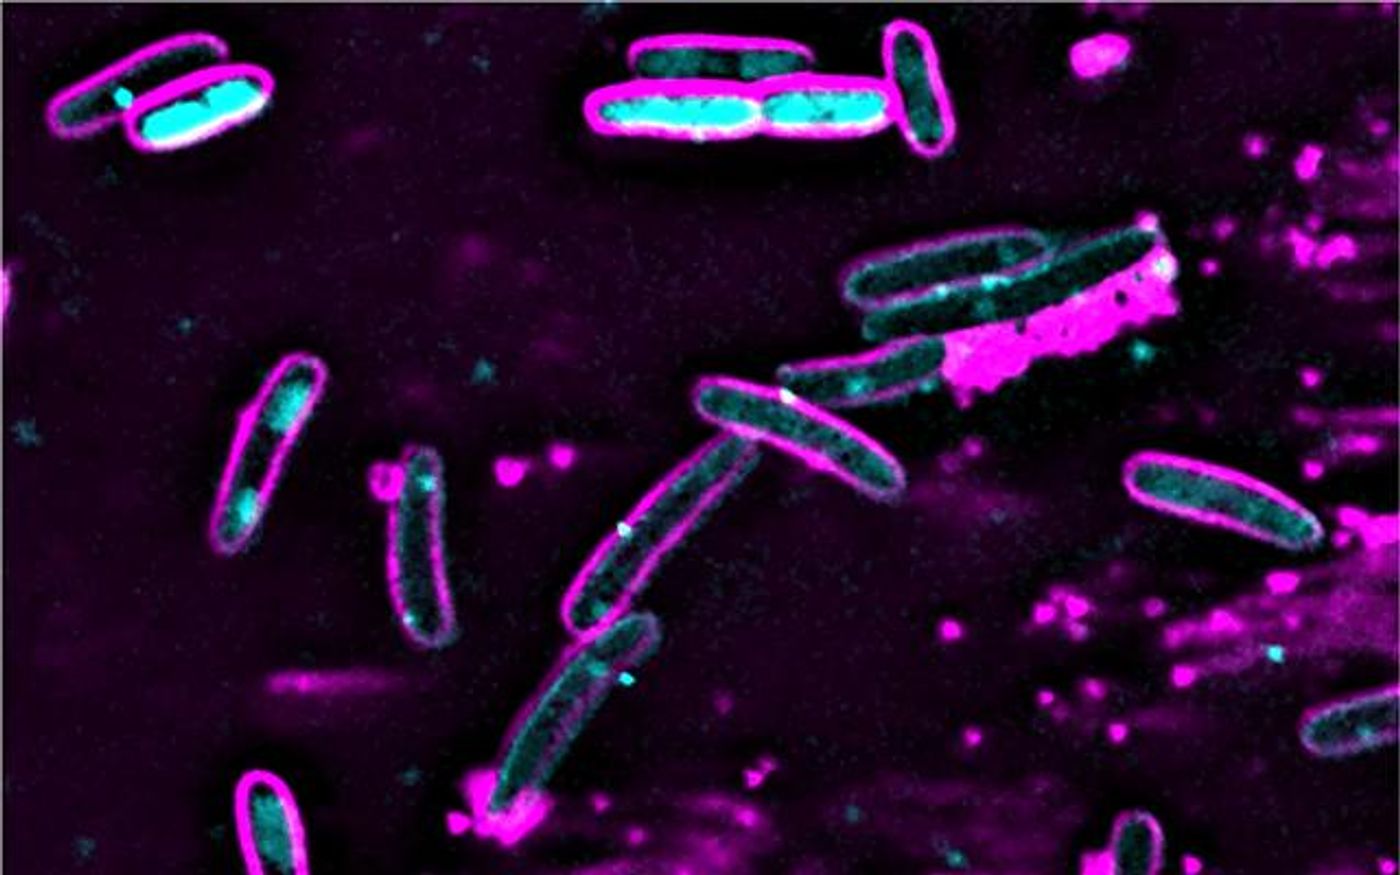 E. coli cells containing the CBASS system (pink oval shapes) destroy their (blue) genomes after bacteriophage lambda infection. Uninfected cells with intact genomes are at the top of the image. / Credit: UC San Diego Health Sciences